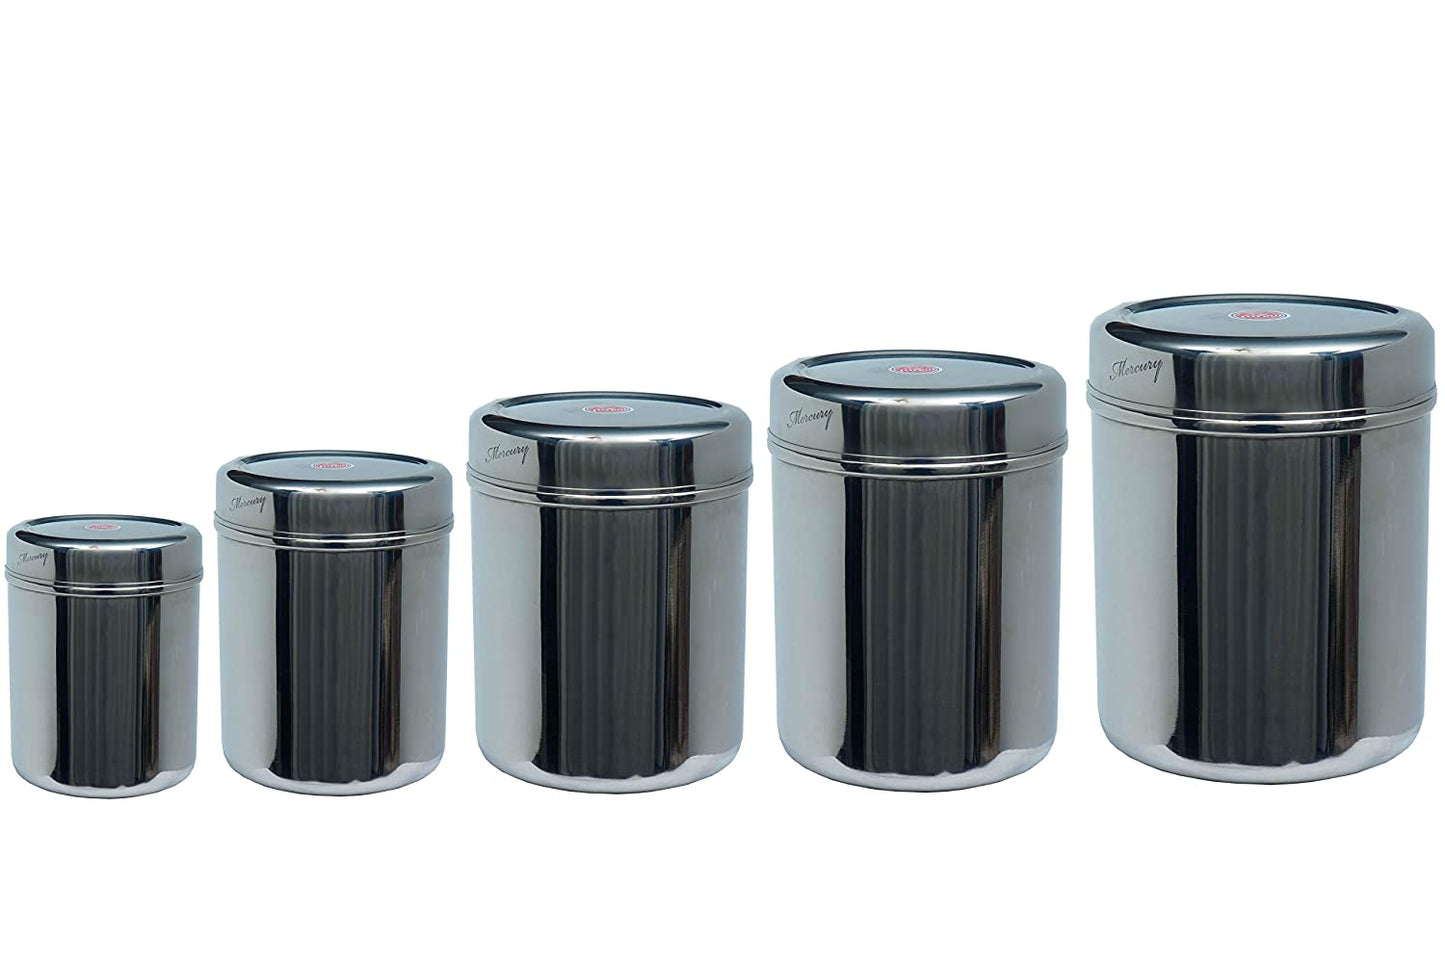 Stainless Steel Canister | Container Set of 5 Pcs